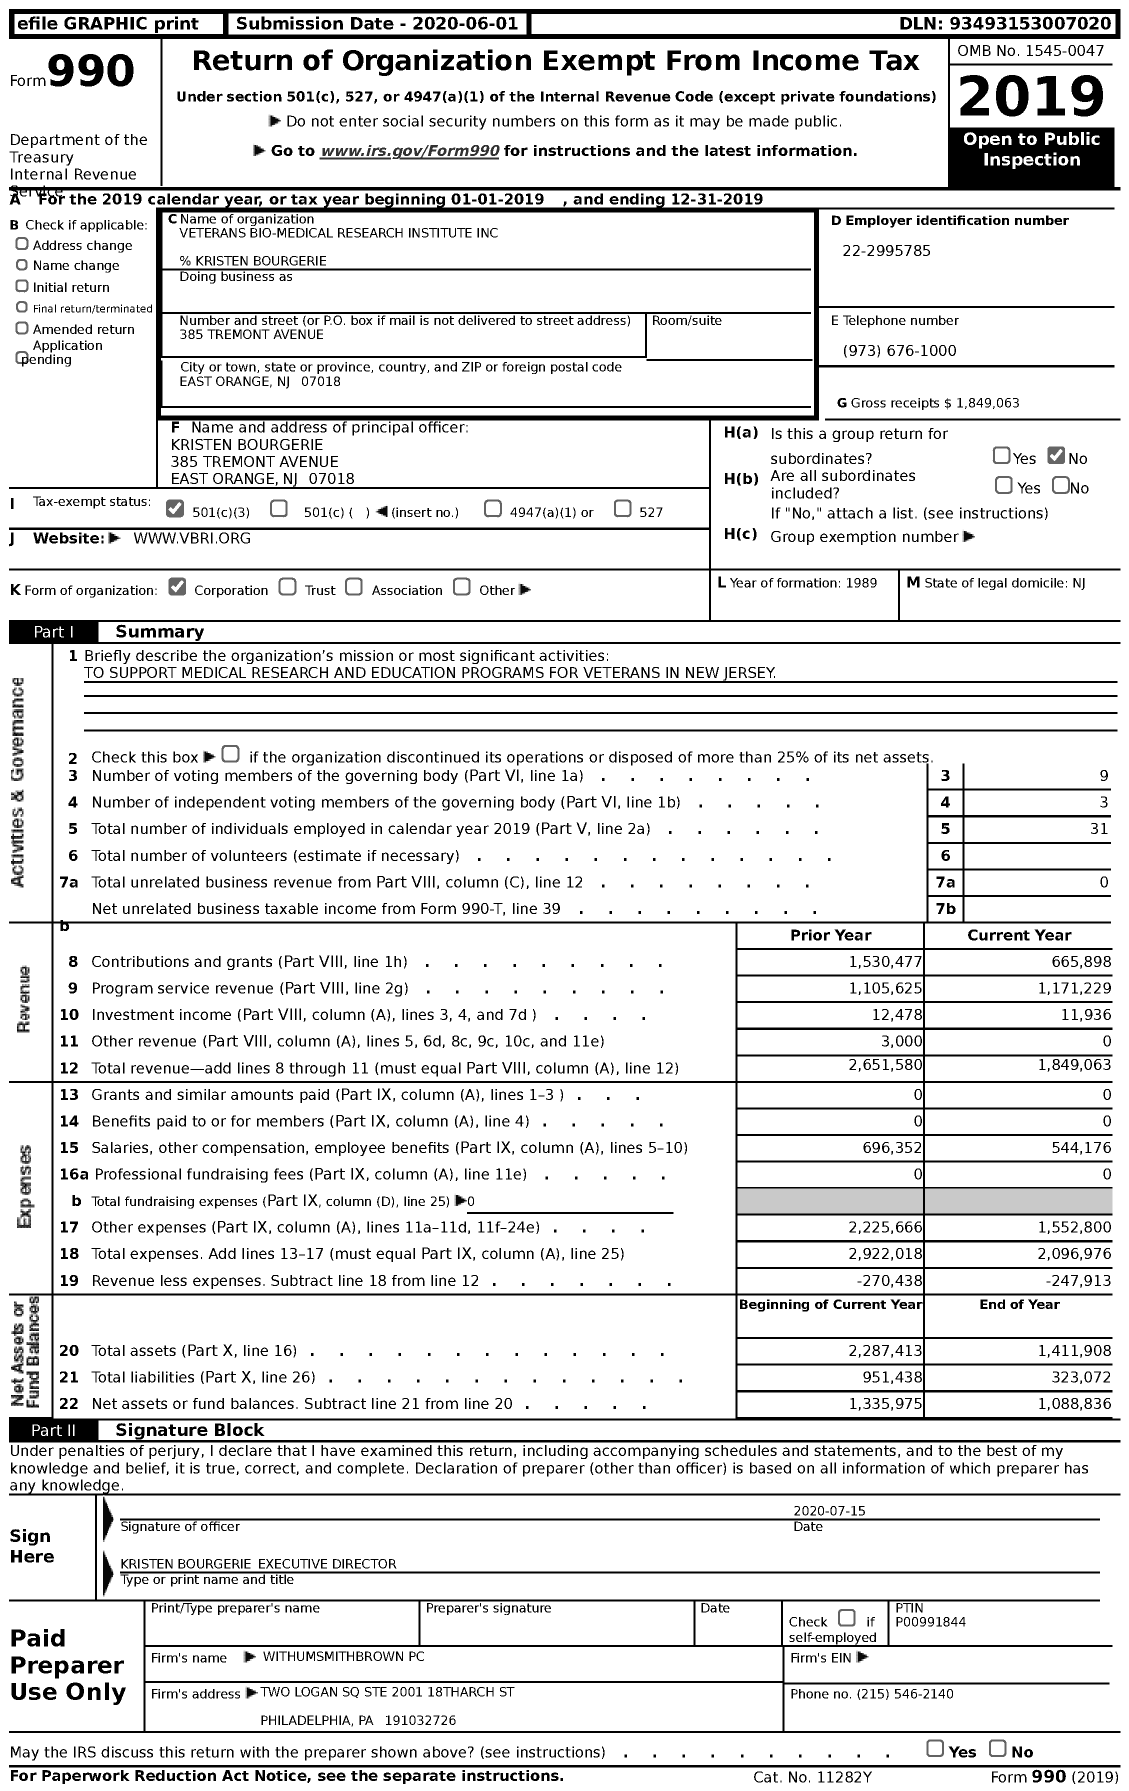 Image of first page of 2019 Form 990 for Veterans Bio-Medical Research Institute (VBRI)